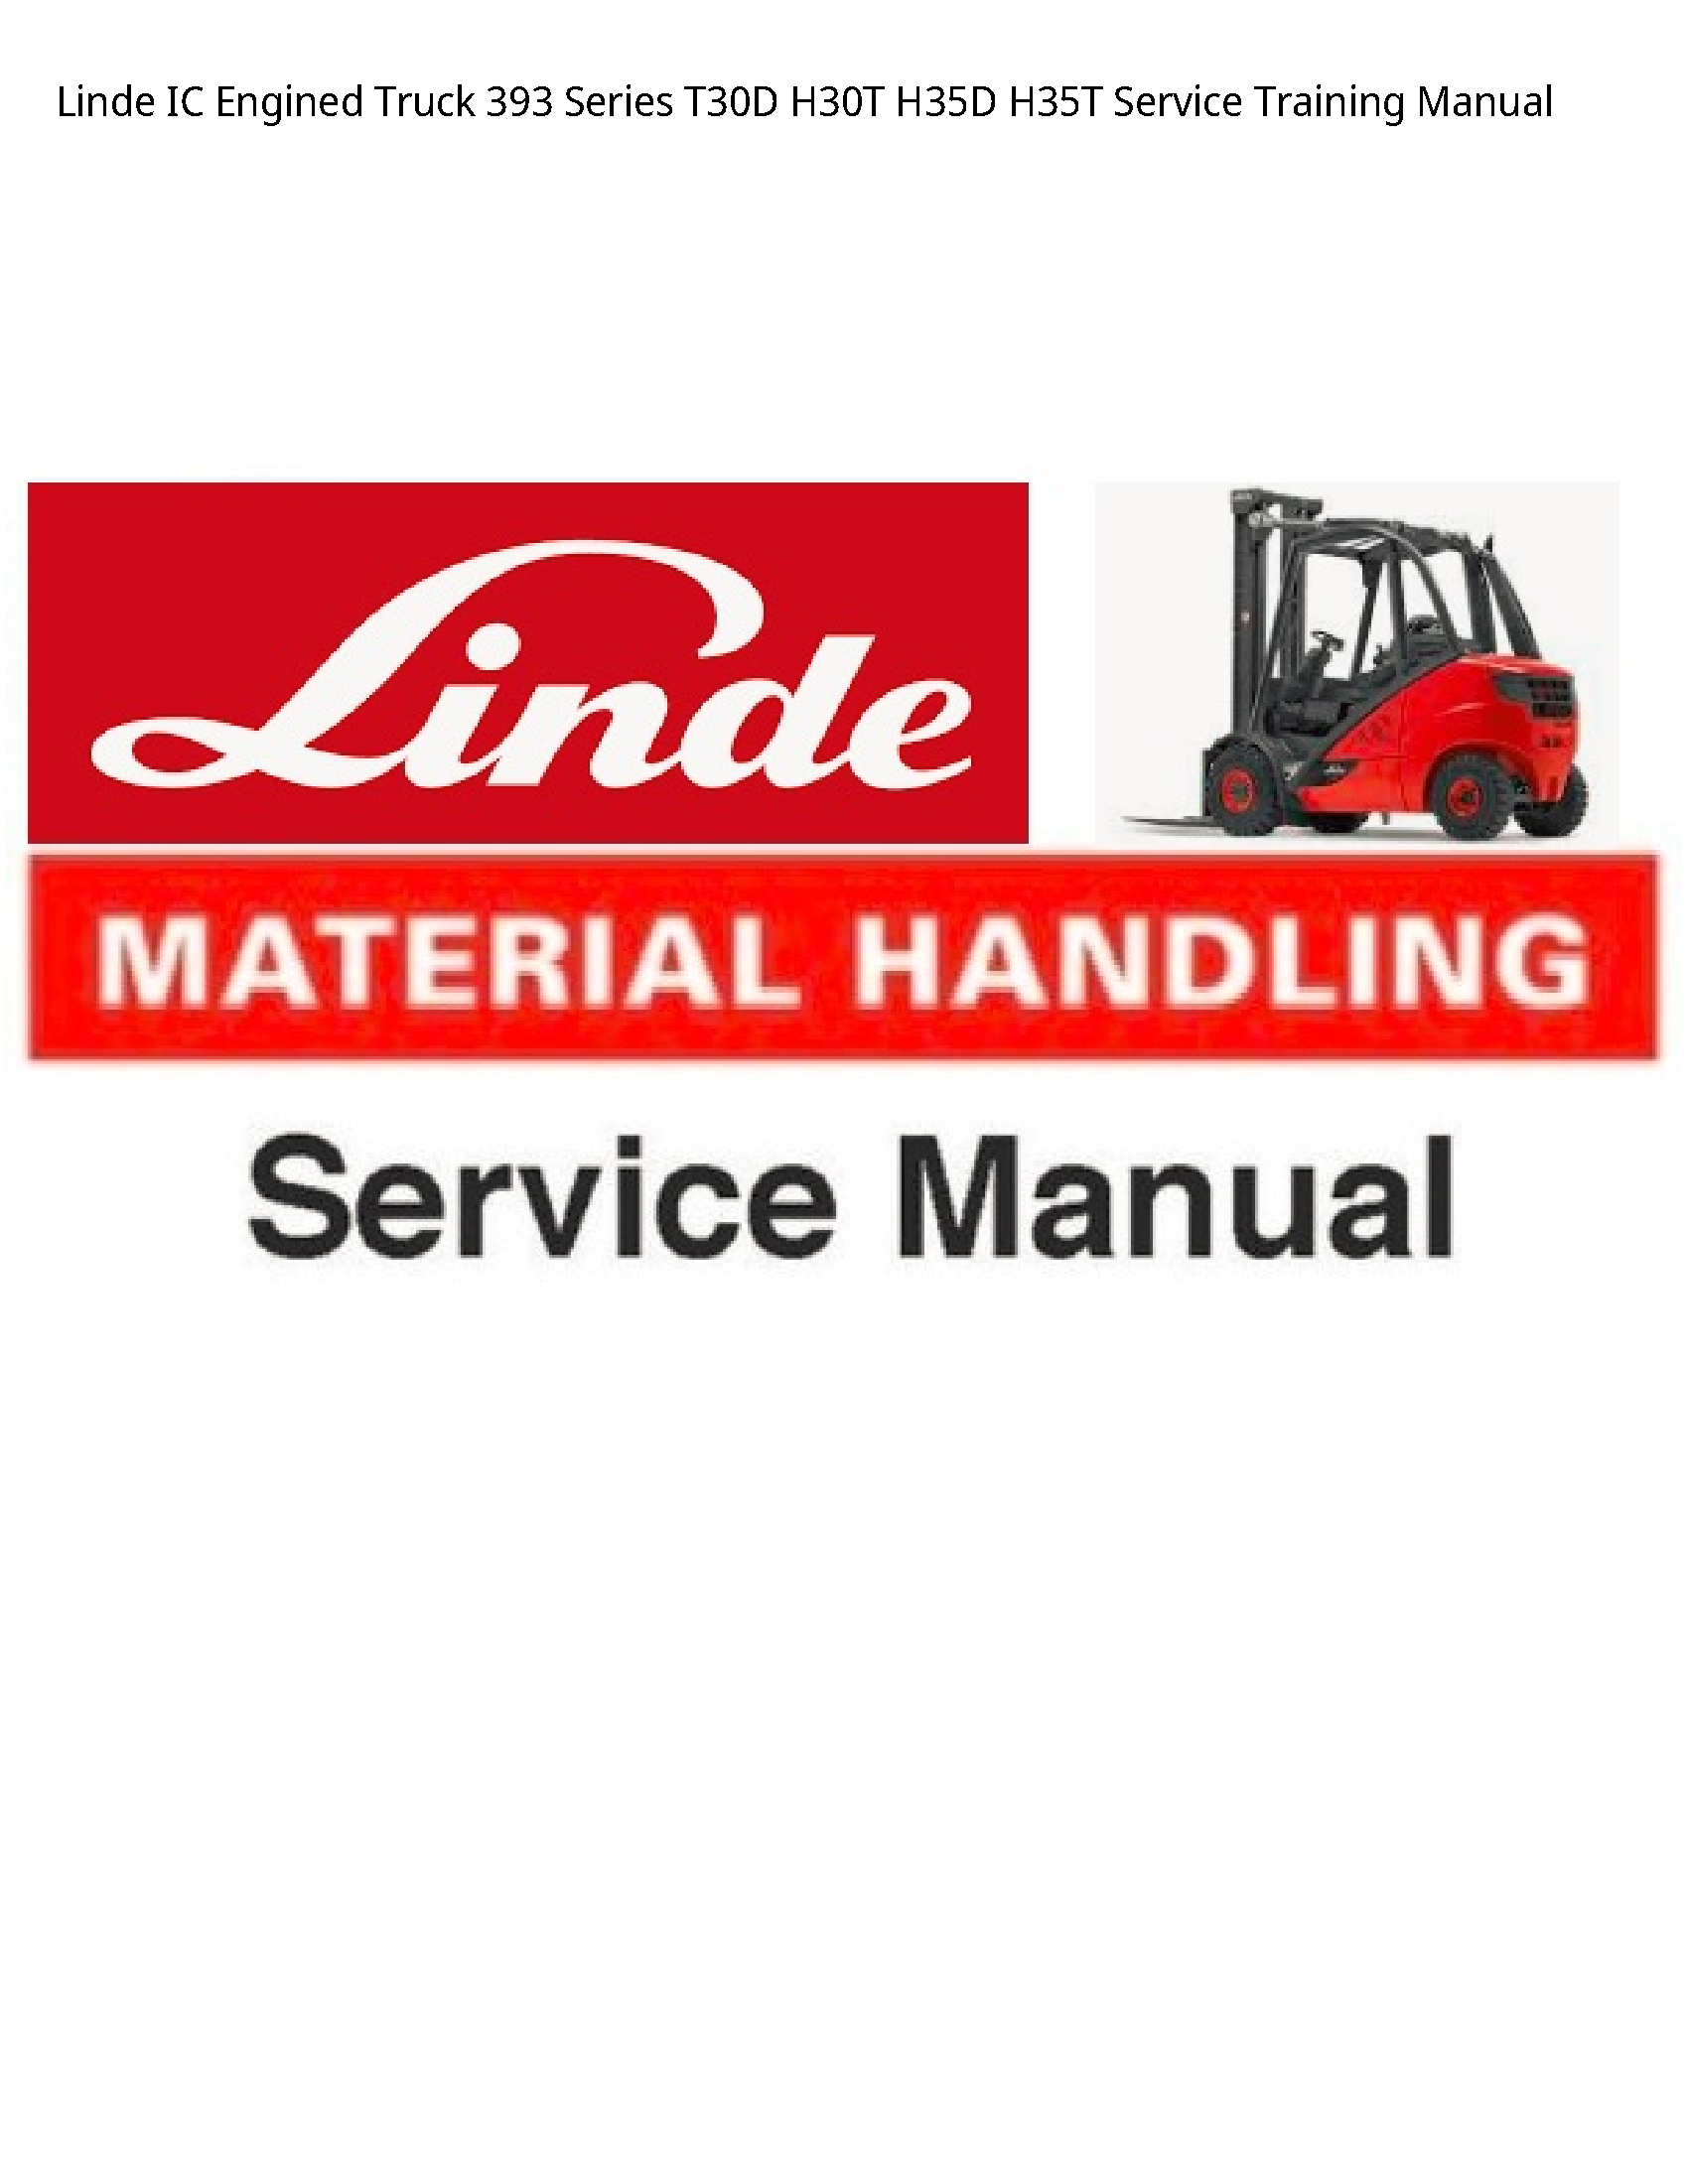 Linde 393 IC Engined Truck Series Service Training manual